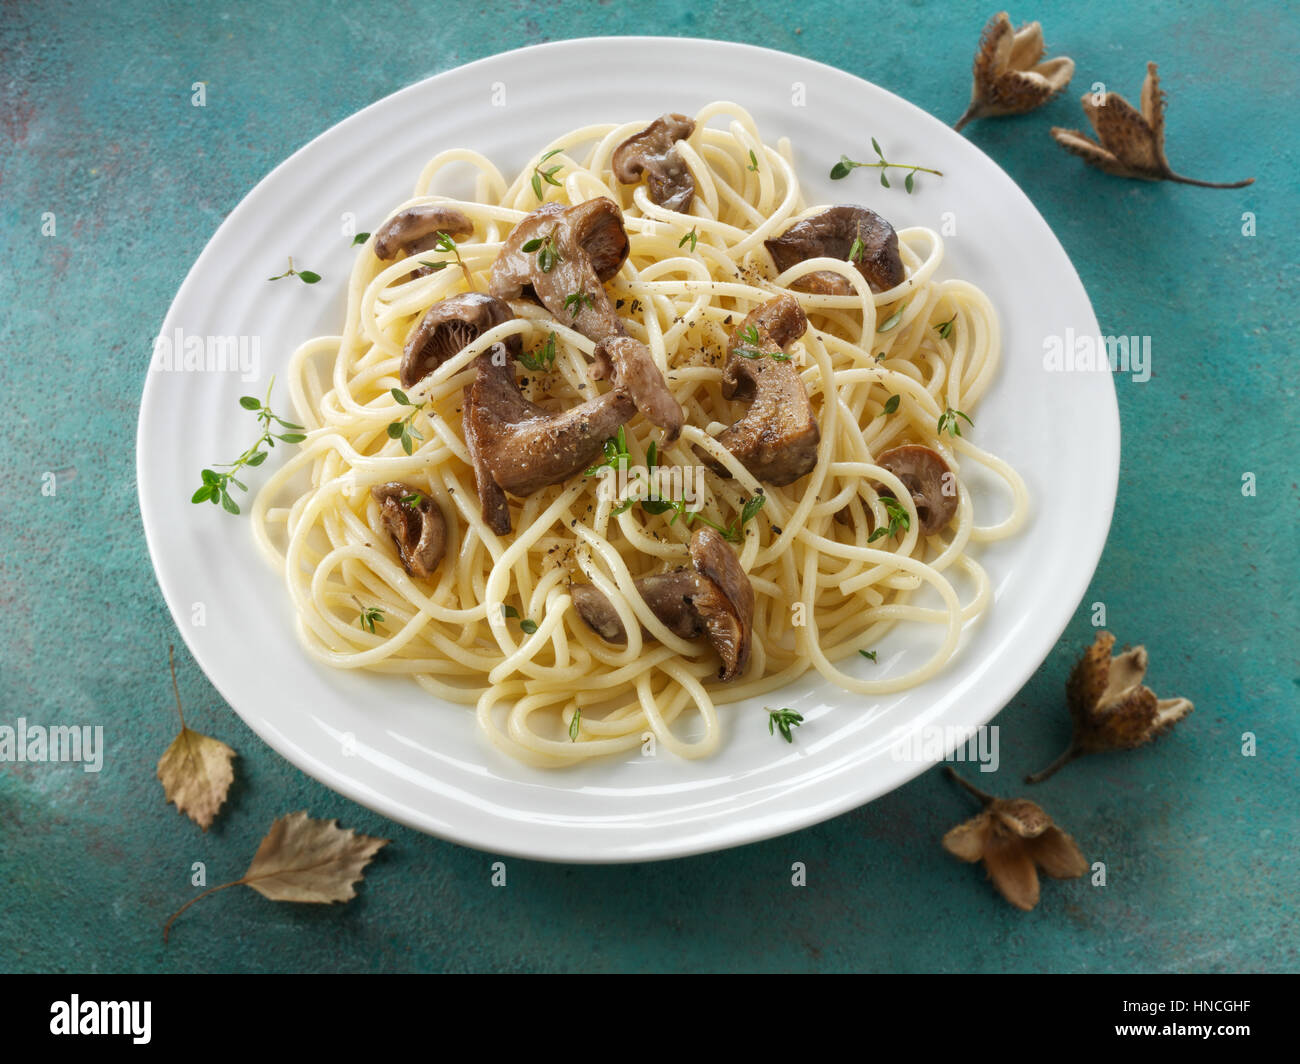 Sauteed wild organic Pied Bleu Mushrooms (Clitocybe nuda) or Blue Foot mushrooms cooked in butter with spaghetti Stock Photo